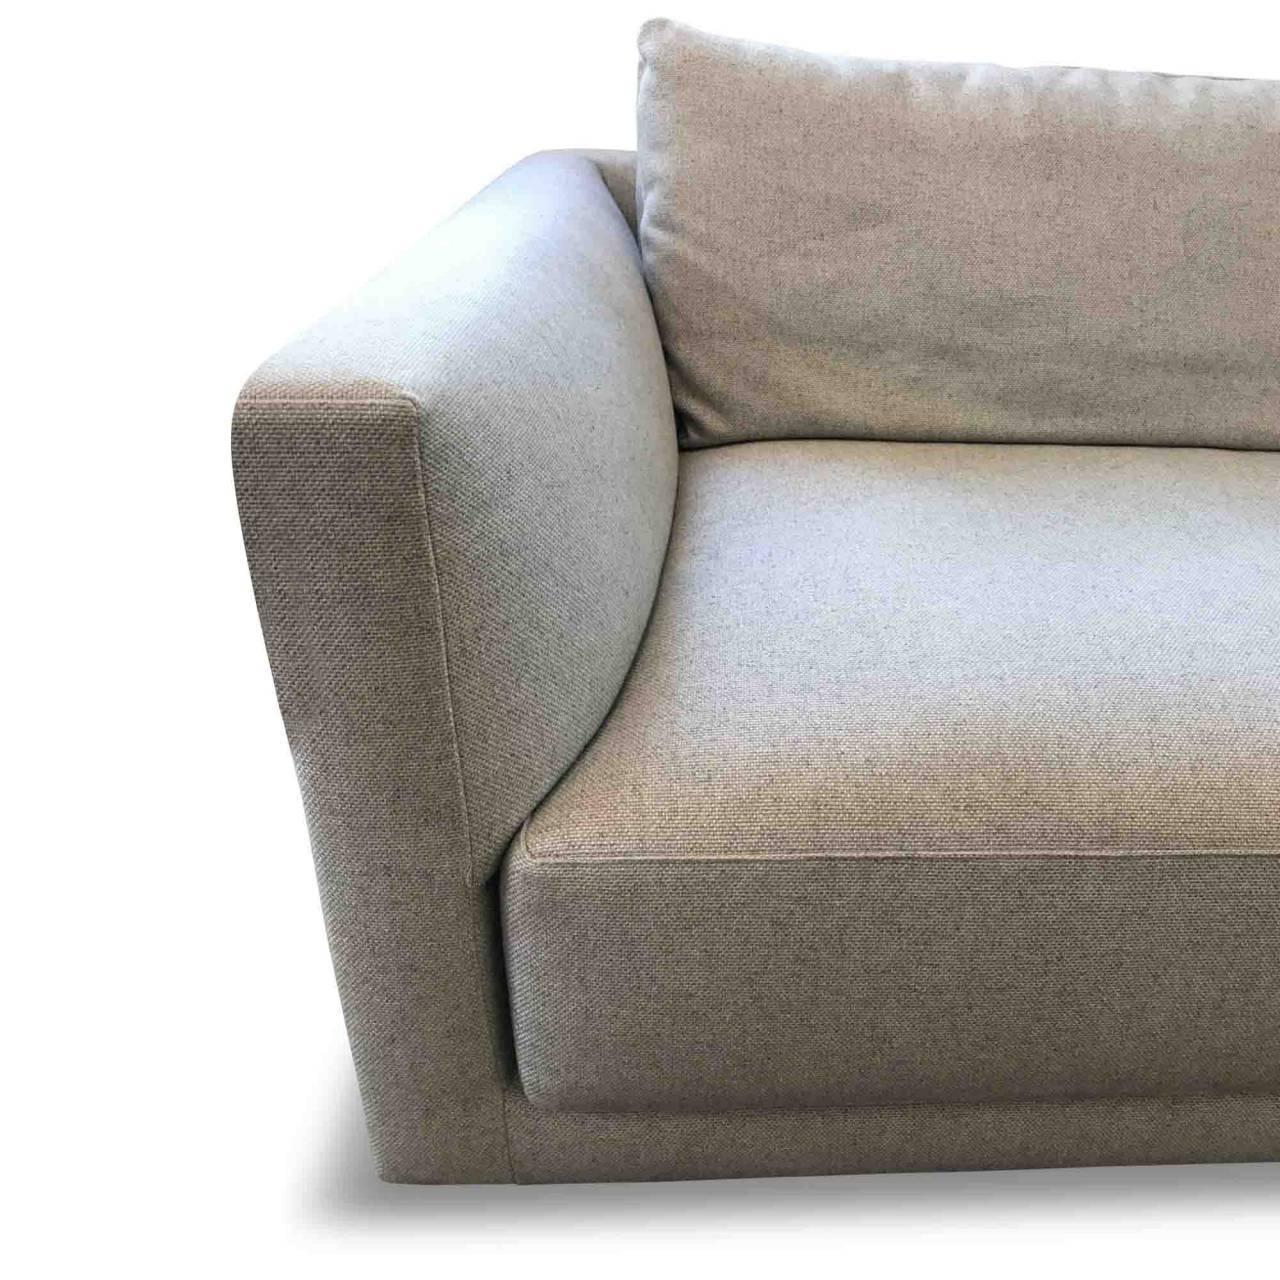 We are delighted to present to you the harmonious sofa 